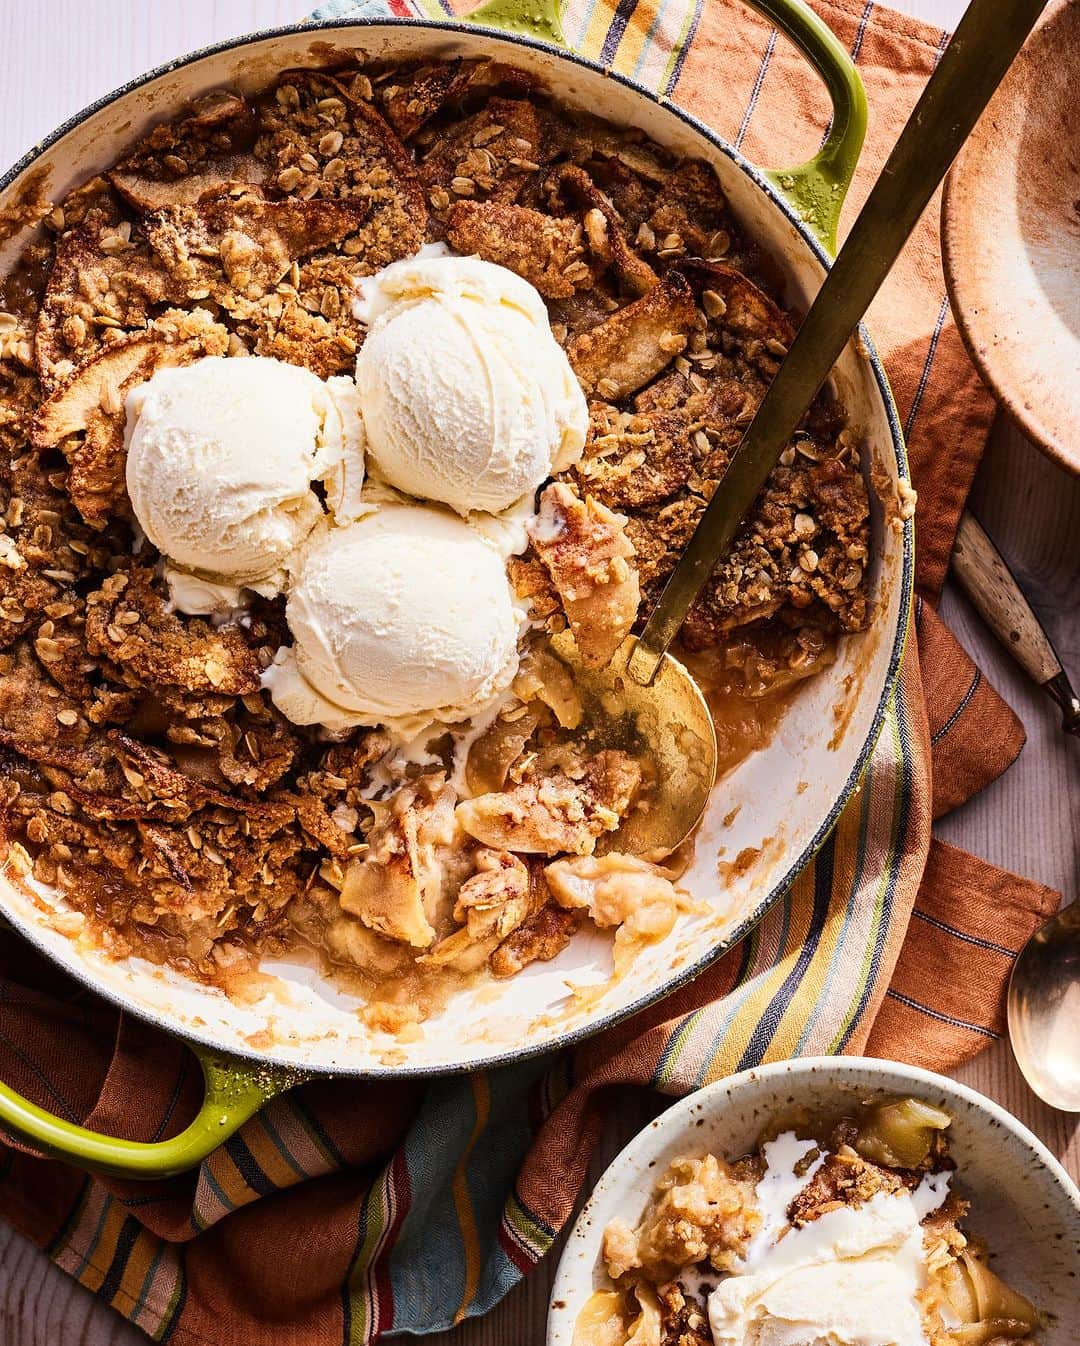 Gaby Dalkinのインスタグラム：「3 of my fav Thanksgiving Desserts: Apple Crisp, Brown Butter Bourbon Pecan Pie and Puff Pastry Apple Galette! All of these and more on a mega Thanksgiving dessert round up on WGC and linked in my profile https://whatsgabycooking.com/15-epic-thanksgiving-desserts/」